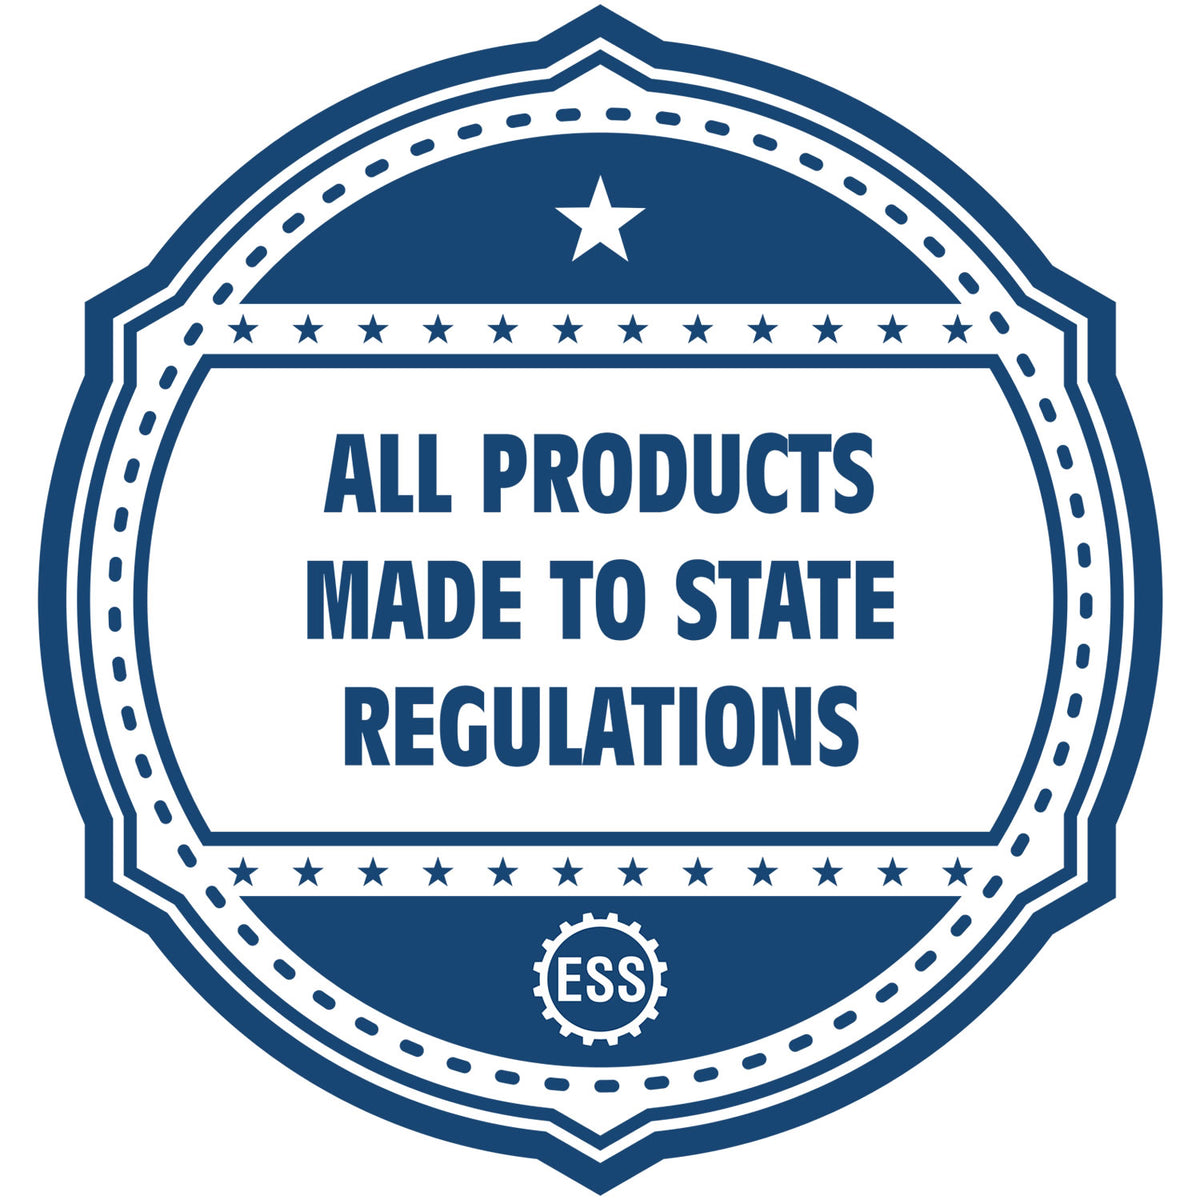 A blue icon or badge for the Gift Delaware Engineer Seal showing that this product is made in compliance with state regulations.